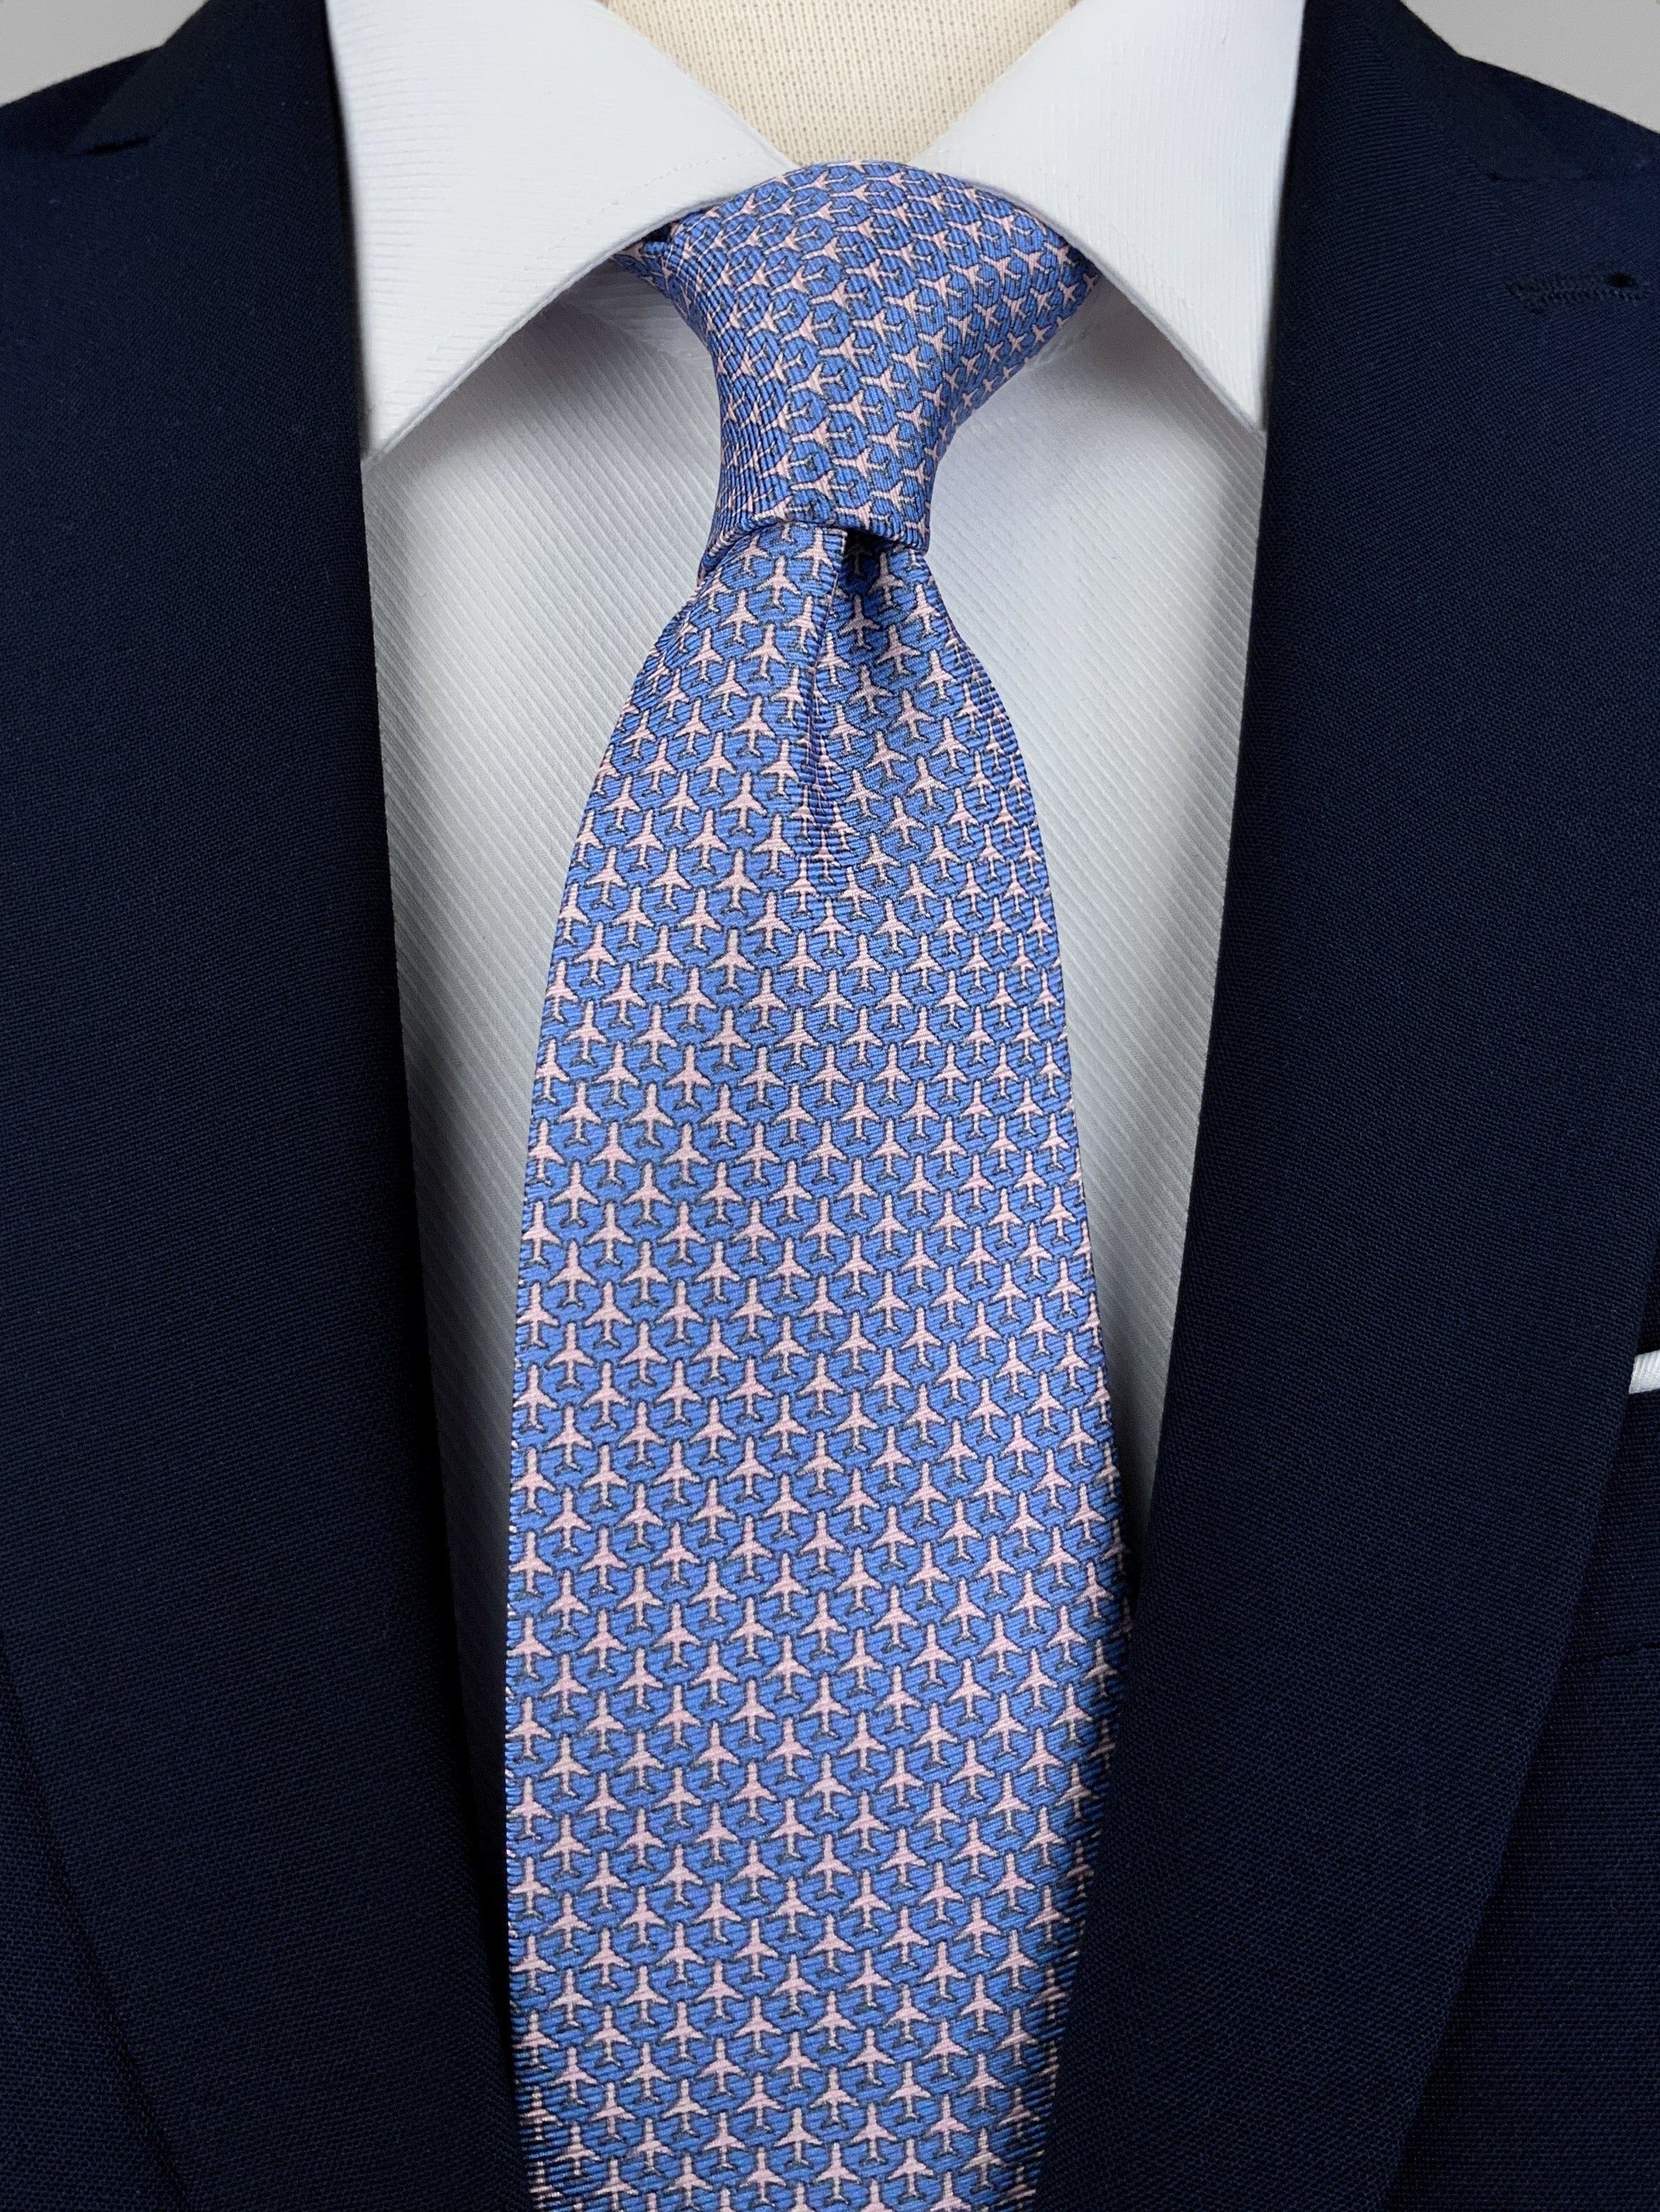 Light blue mulberry silk twill tie with a airplane microprint pattern in a pink shade worn with a white shirt and a navy blue suit